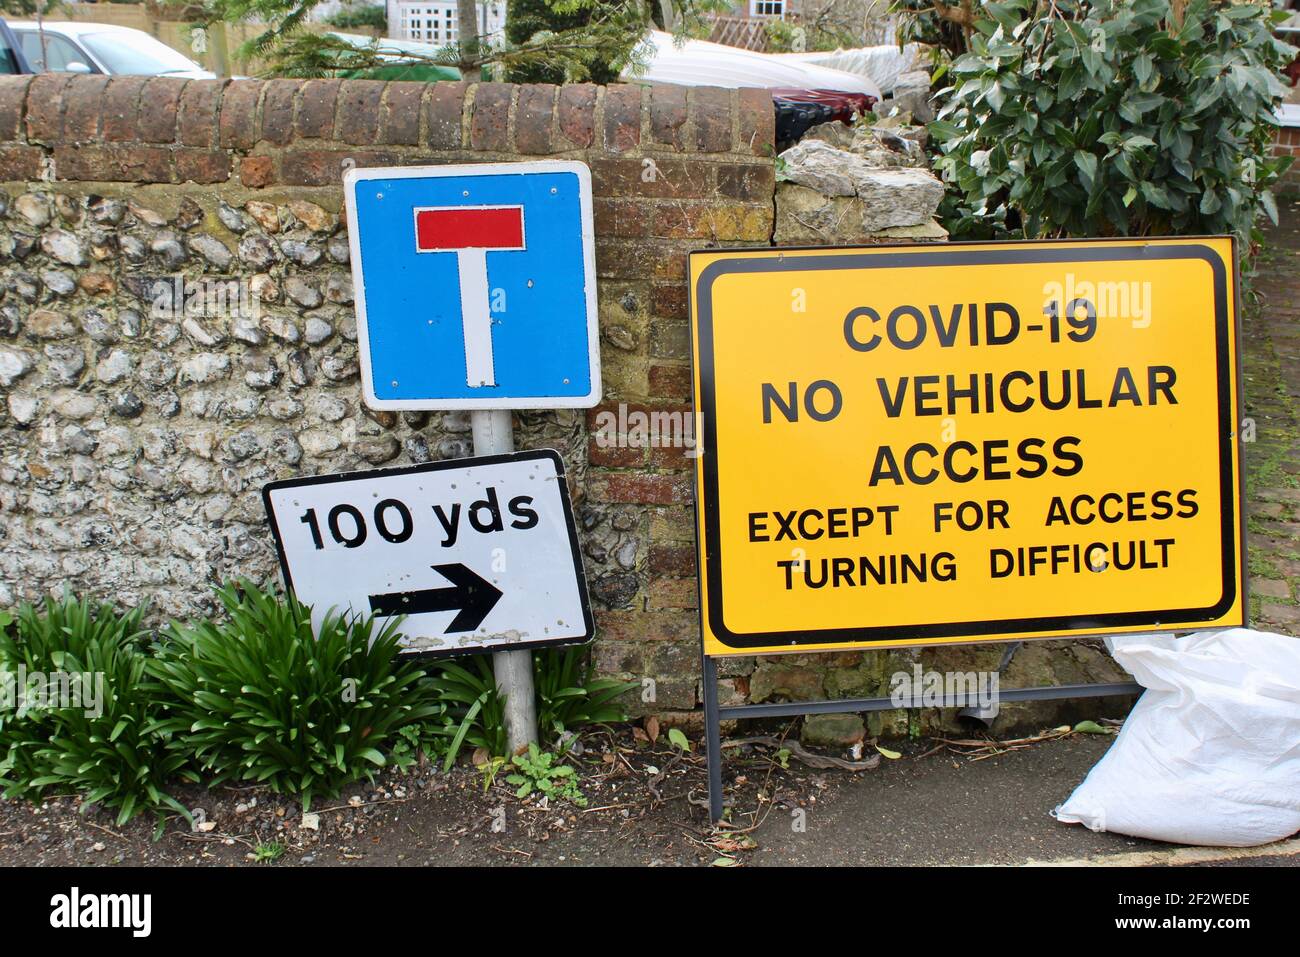 Covid 19, No Vehicular Access, Except For Access, Turning Difficult. Covid road sign advising of potential risk as turning is difficult. Stock Photo